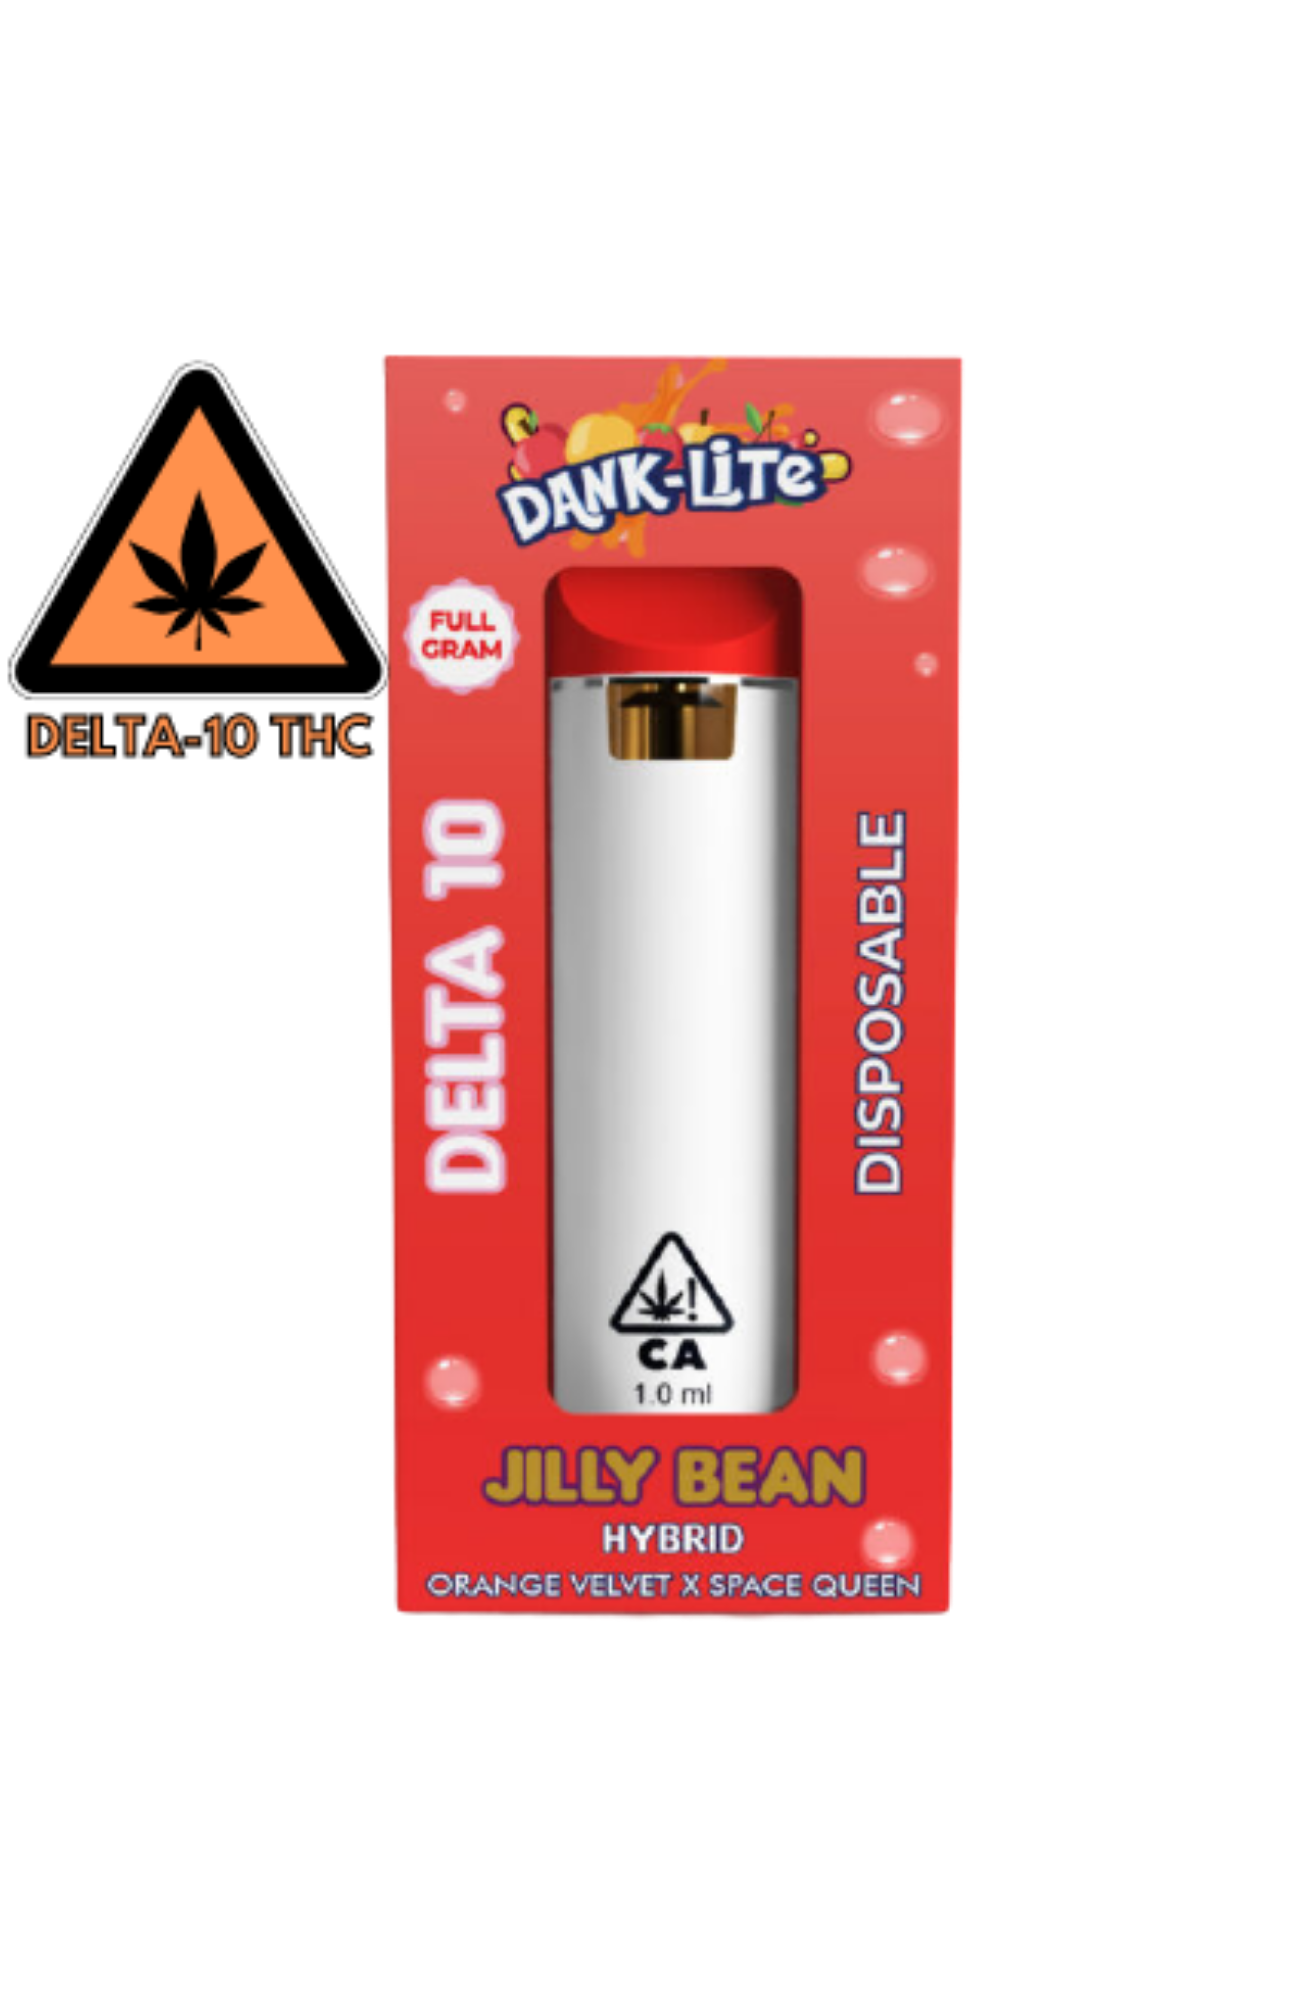 Is Vaping Delta 10 Safe - Thc|Delta|Products|Delta-10|Effects|Cbd|Cannabis|Cannabinoids|Cannabinoid|Hemp|Oil|Body|Benefits|Pain|Drug|Inflammation|People|Receptors|Gummies|Arthritis|Market|Product|Marijuana|Delta-8|Research|States|Cb1|Test|Strains|Effect|Vape|Experience|Users|Time|Compound|System|Way|Anxiety|Plants|Chemical|Delta-10 Thc|Delta-9 Thc|Cbd Oil|Drug Test|Delta-10 Products|Side Effects|Delta-8 Thc|Cb1 Receptors|Cb2 Receptors|Cannabis Plants|Endocannabinoid System|Minor Discomfort|Medical Marijuana|Thc Products|Psychoactive Effects|Arthritic Symptoms|New Cannabinoid|Fusion Farms|Arthritic Patients|Conclusion Delta|Medical Cannabis Oil|Arthritis Pain|Good Fit|Double Bond|Anticonvulsant Actions|Medical Benefit|Anticonvulsant Properties|Epileptic Children|User Guide|Farm Bill